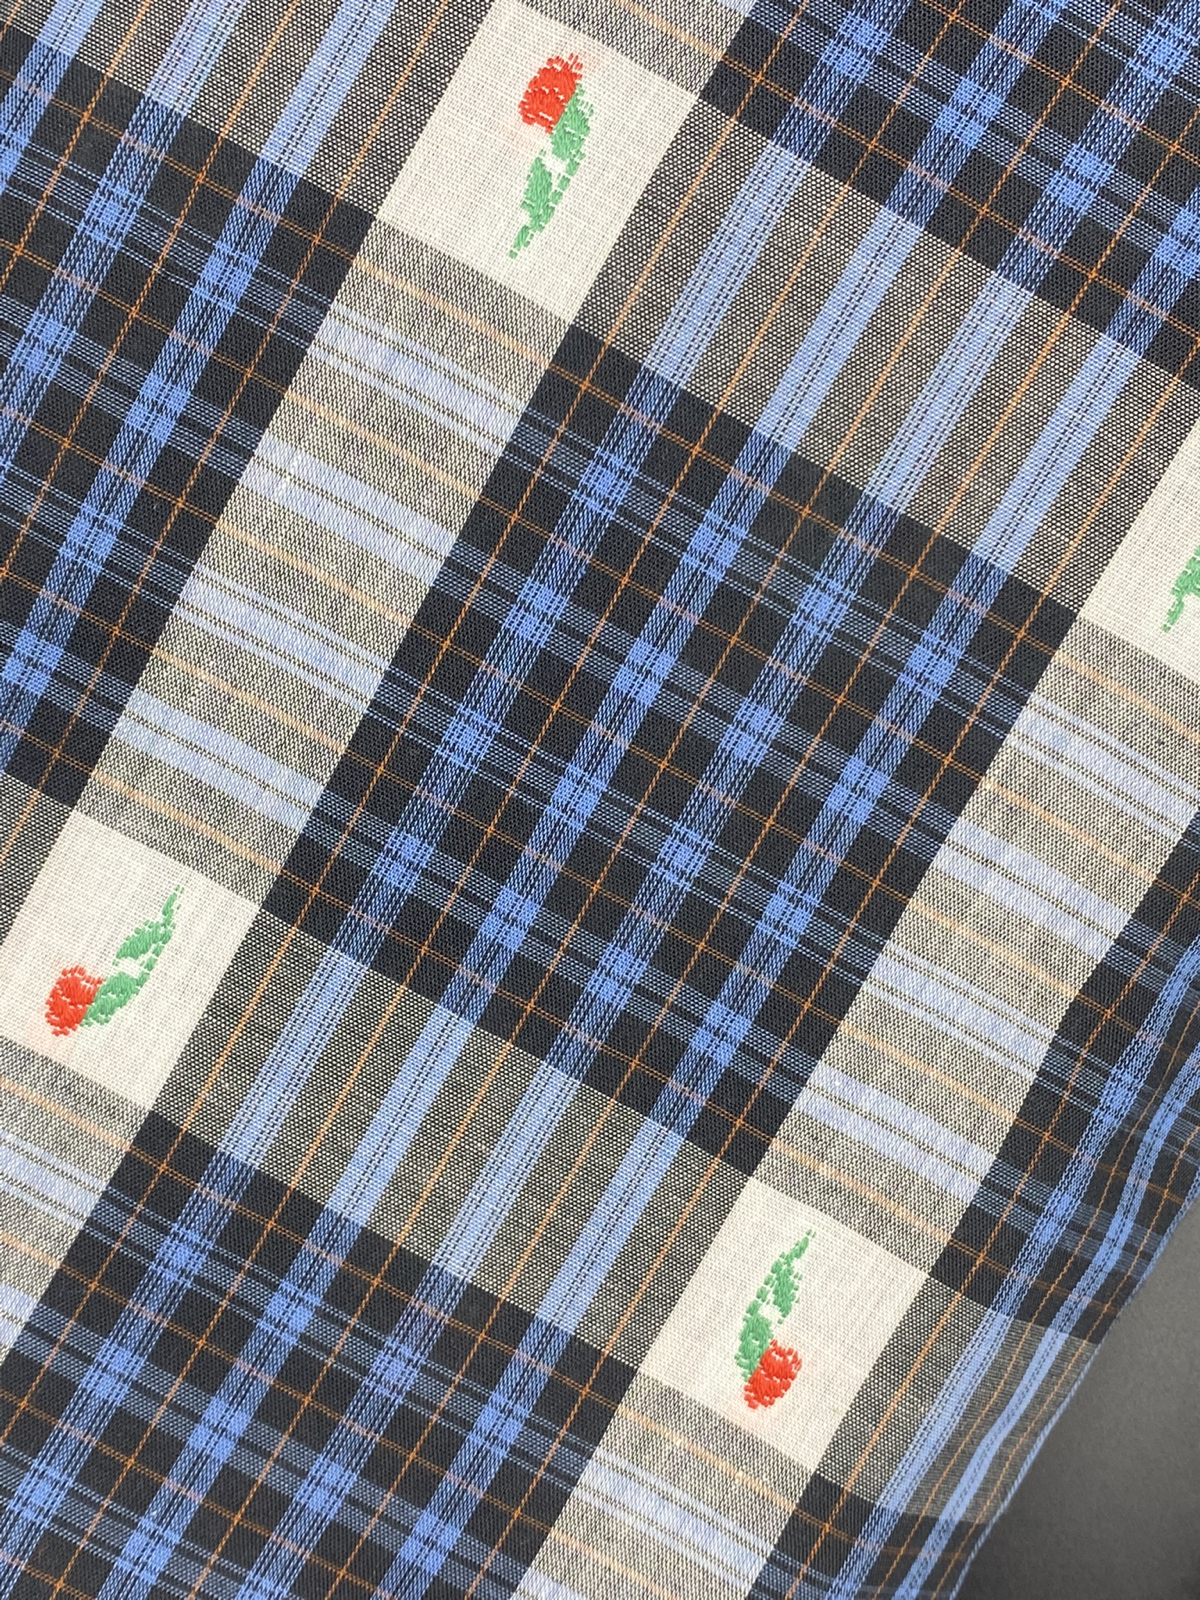 1970s-1980s Plaid Shirting with Floral Embroidery